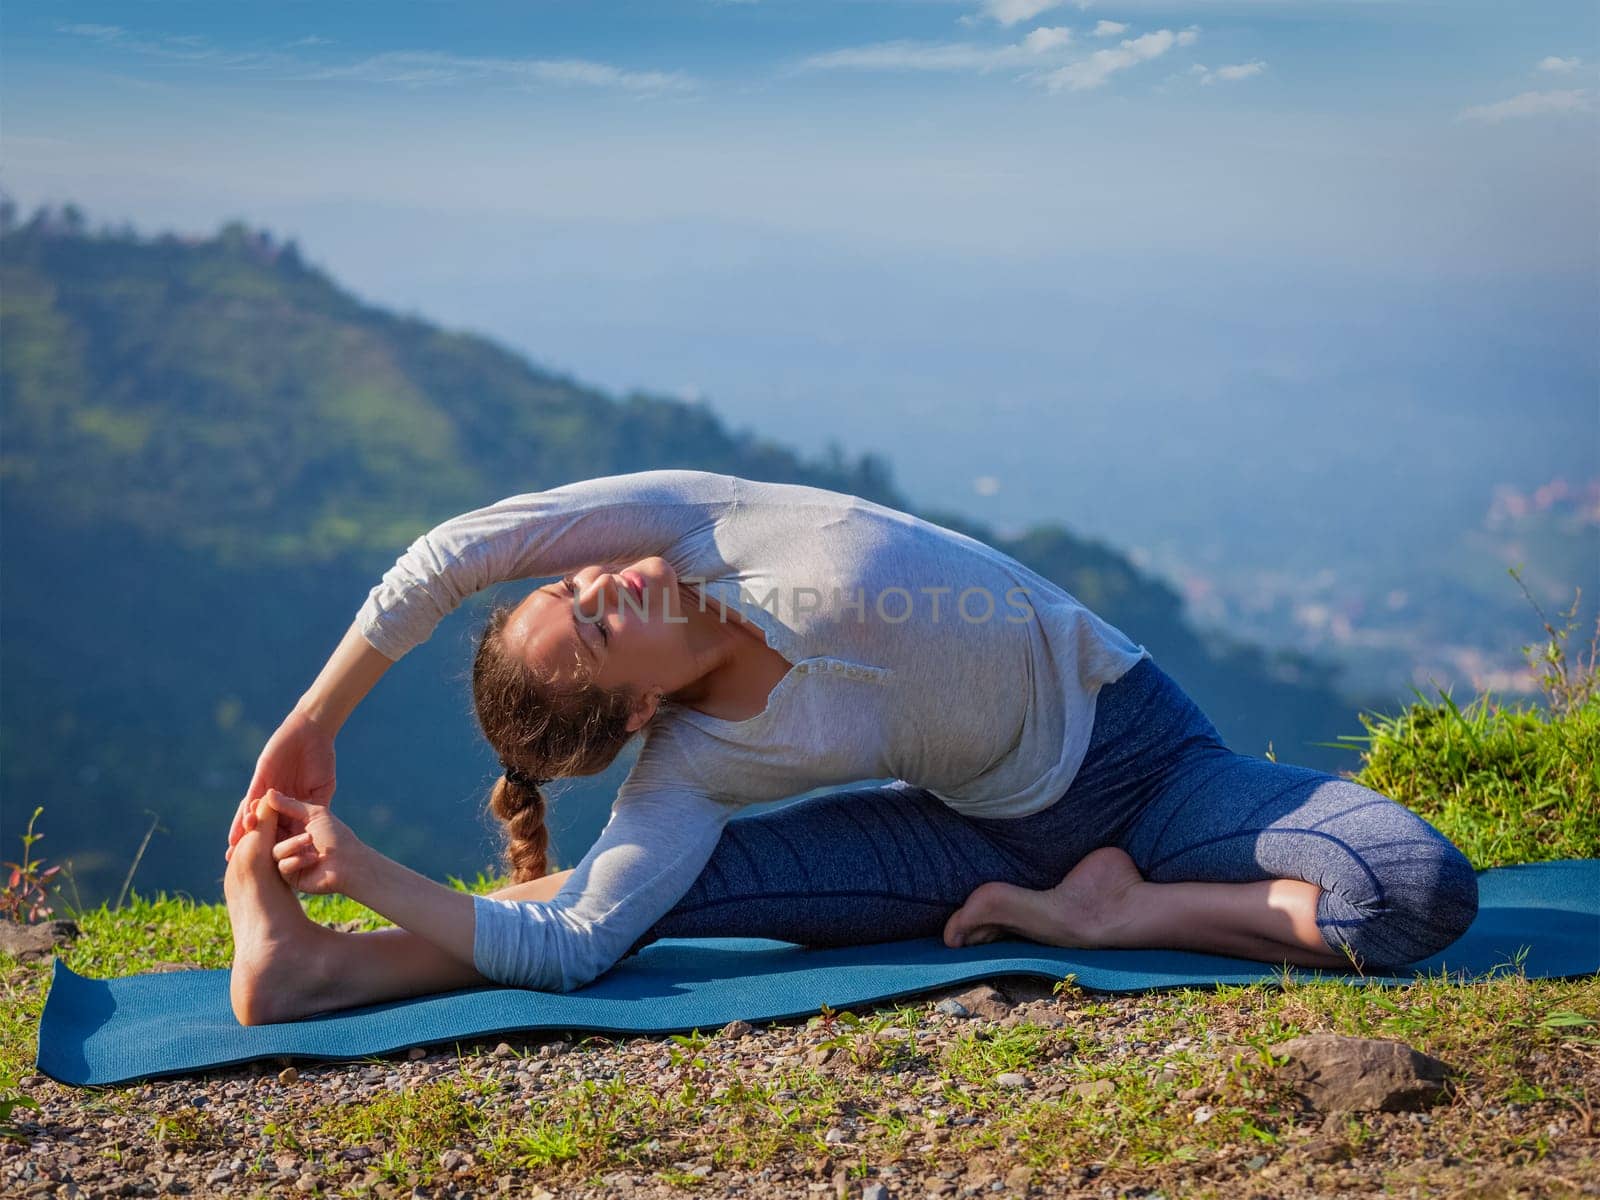 Yoga outdoors - young sporty fit woman doing Hatha Yoga asana parivrtta janu sirsasana - Revolved Head-to-Knee Pose - in mountains in the morning